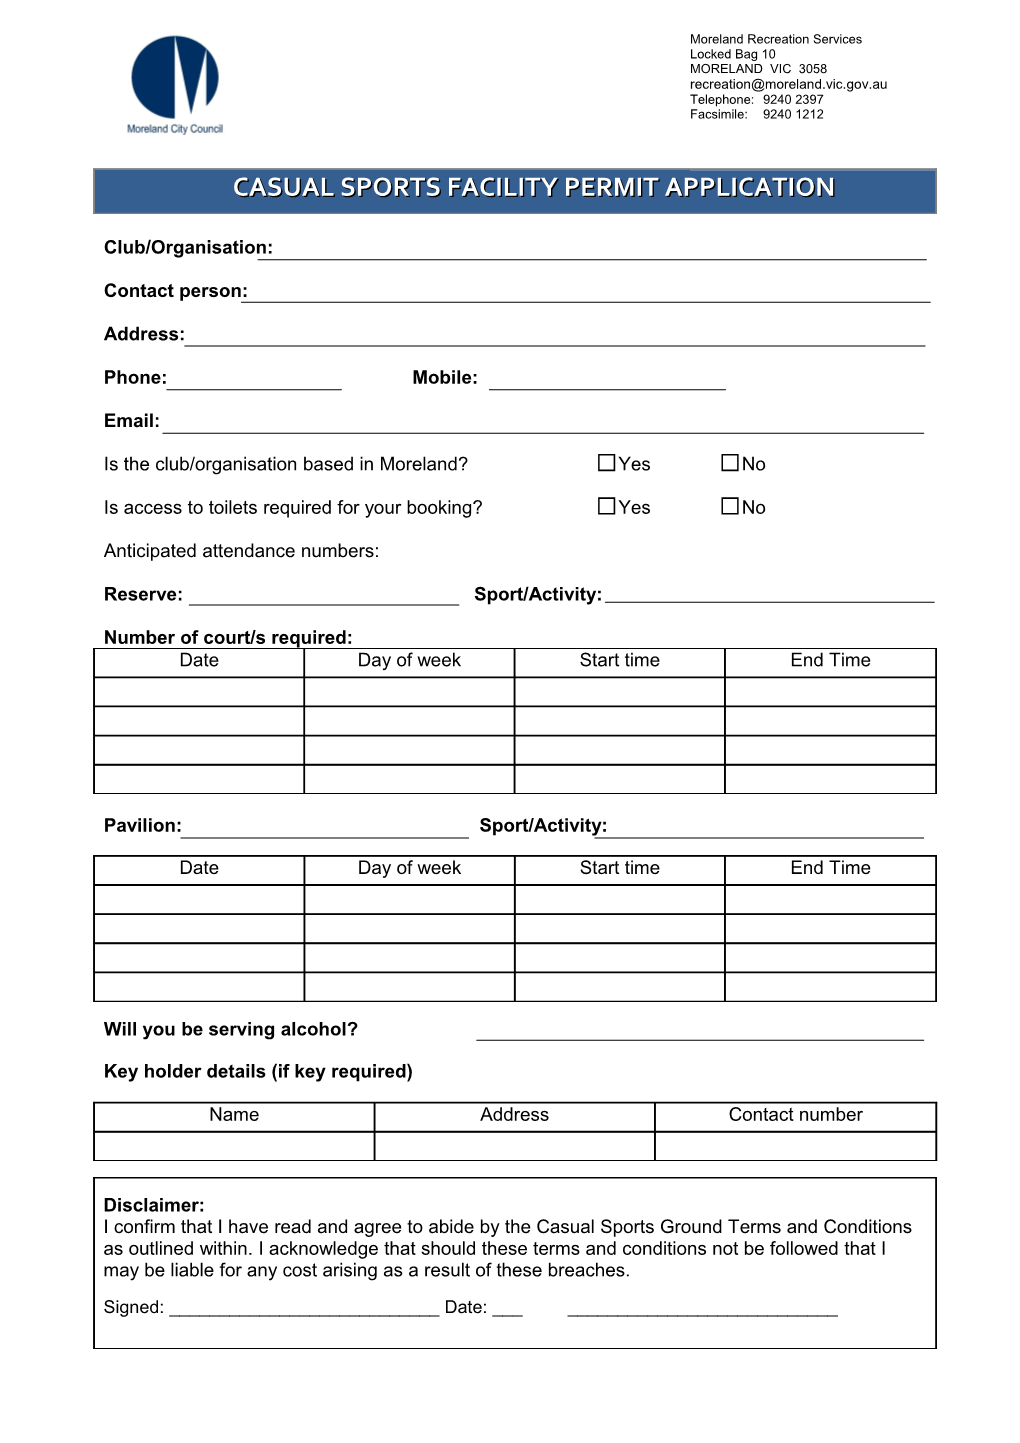 Casual Sports Ground Booking Application